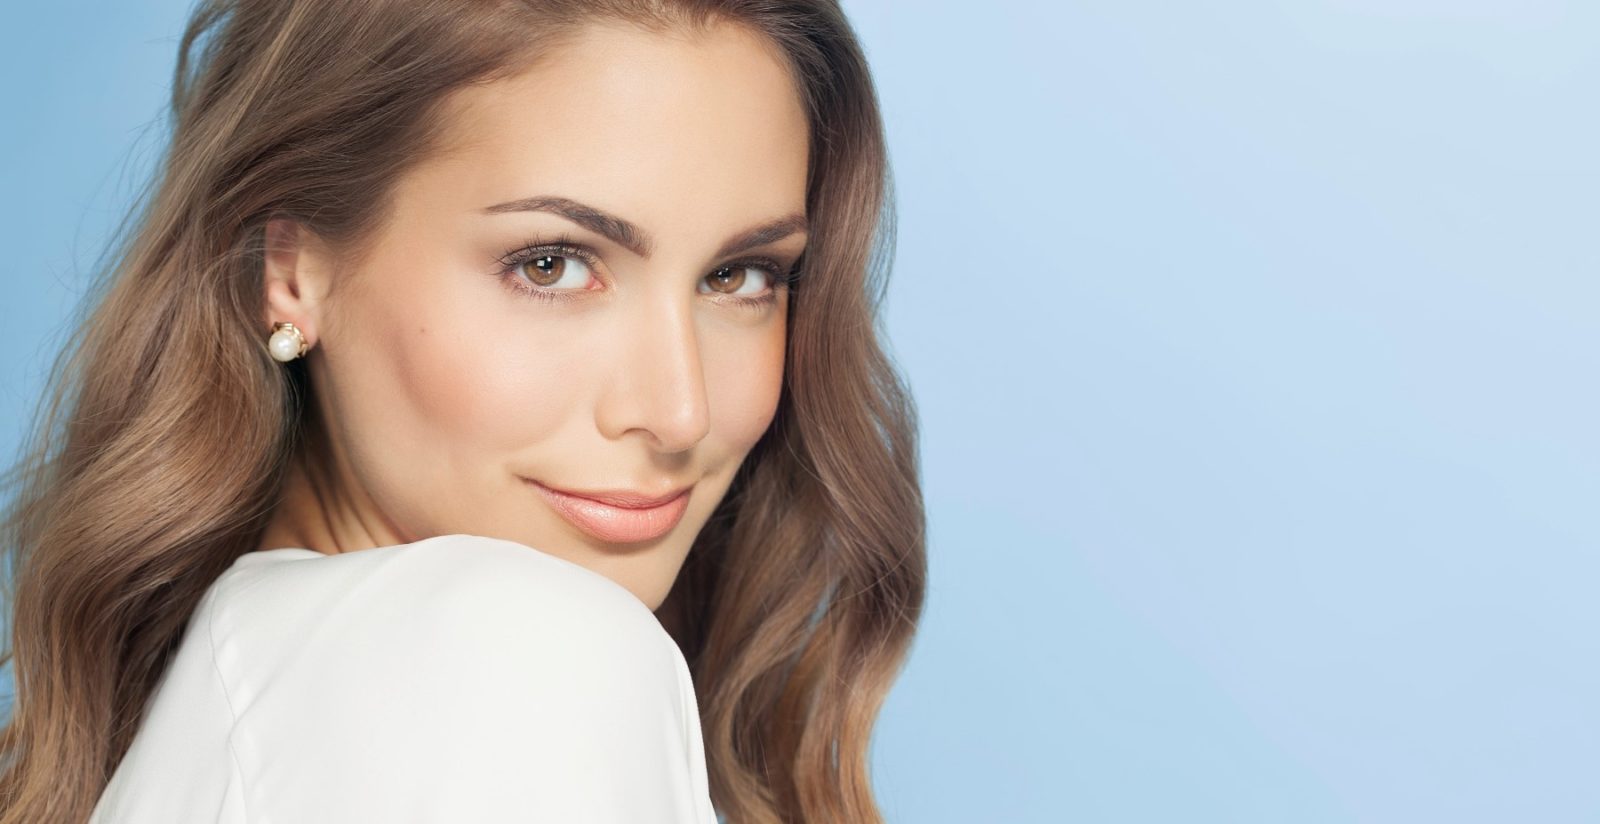 Ageless Beauty: Discover the Benefits of SkinCenter’s Anti-Aging Solutions